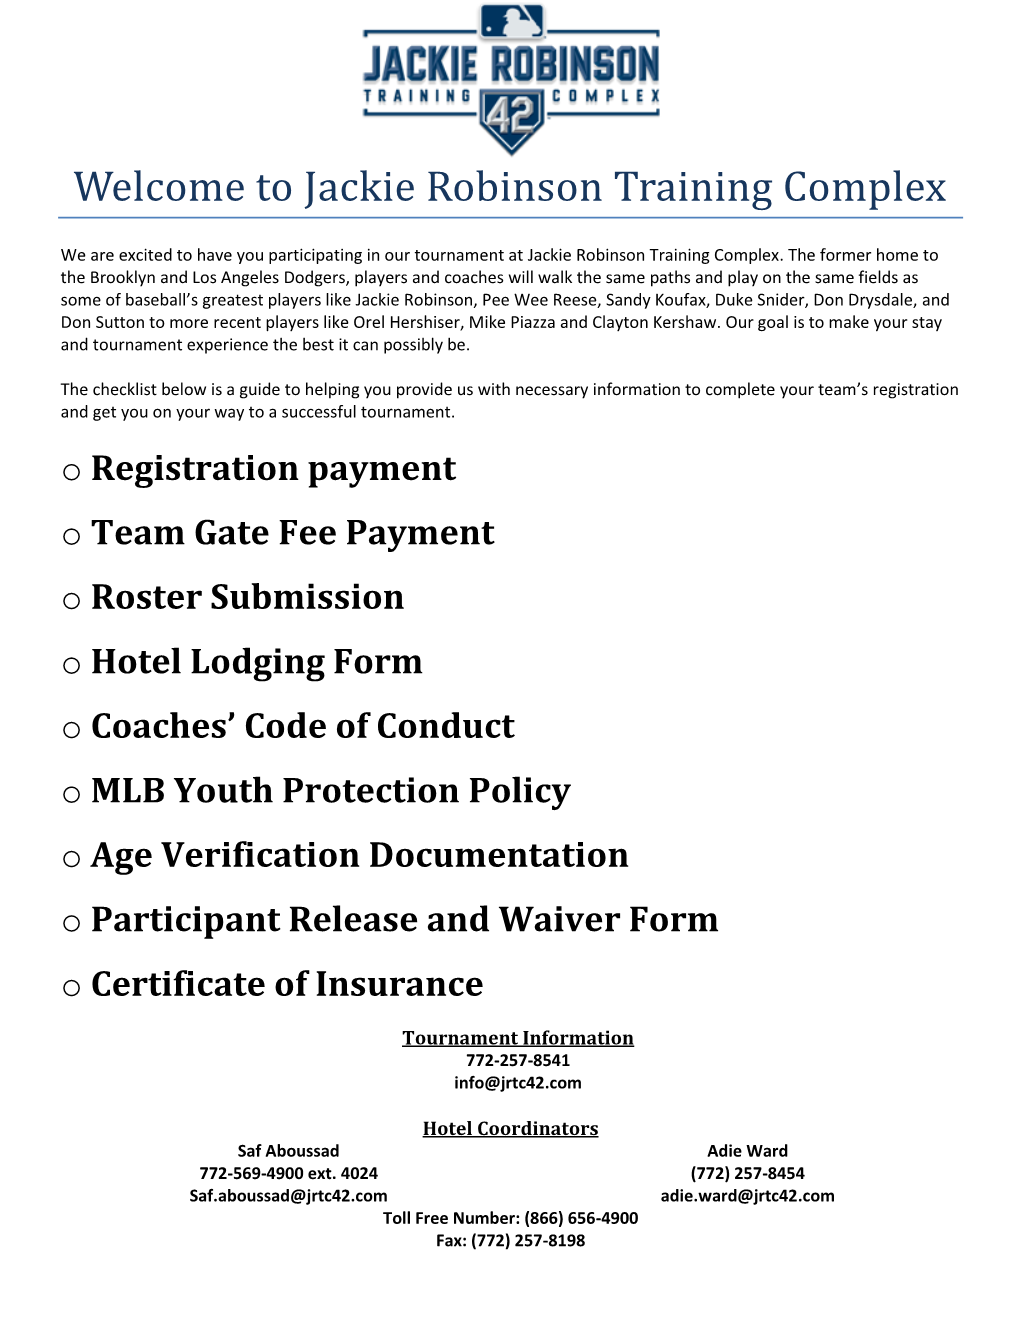 Welcome to Jackie Robinson Training Complex